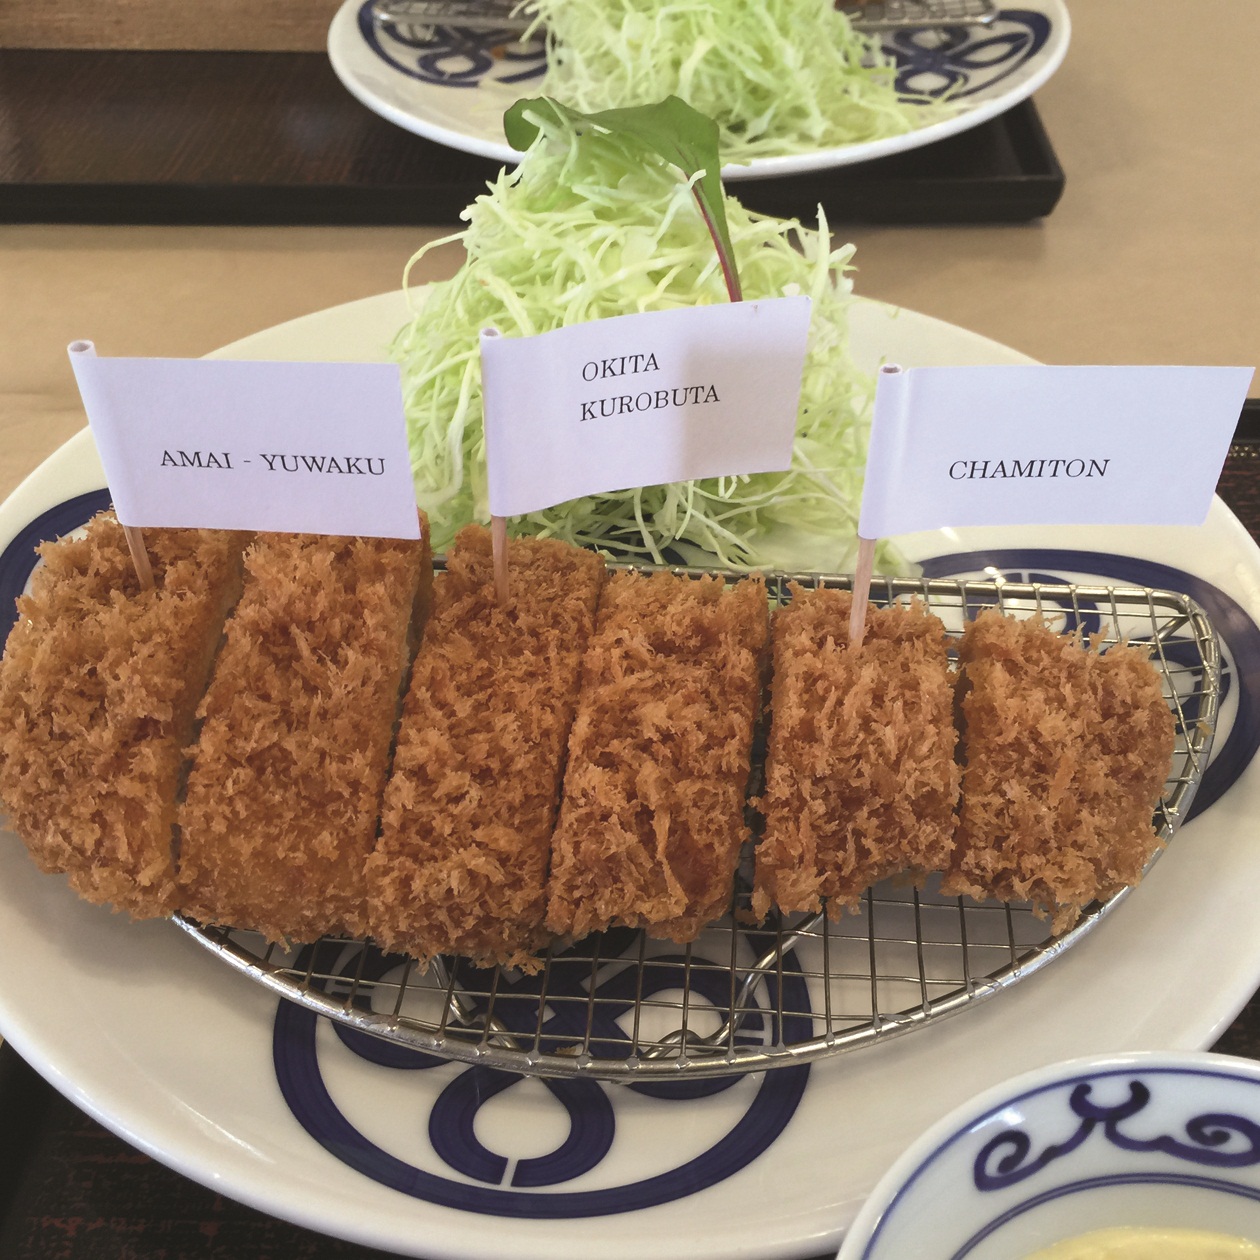 MAISEN tonkatsu made of three different kinds of pork, ready to be sampled by visiting Manila media in Tokyo